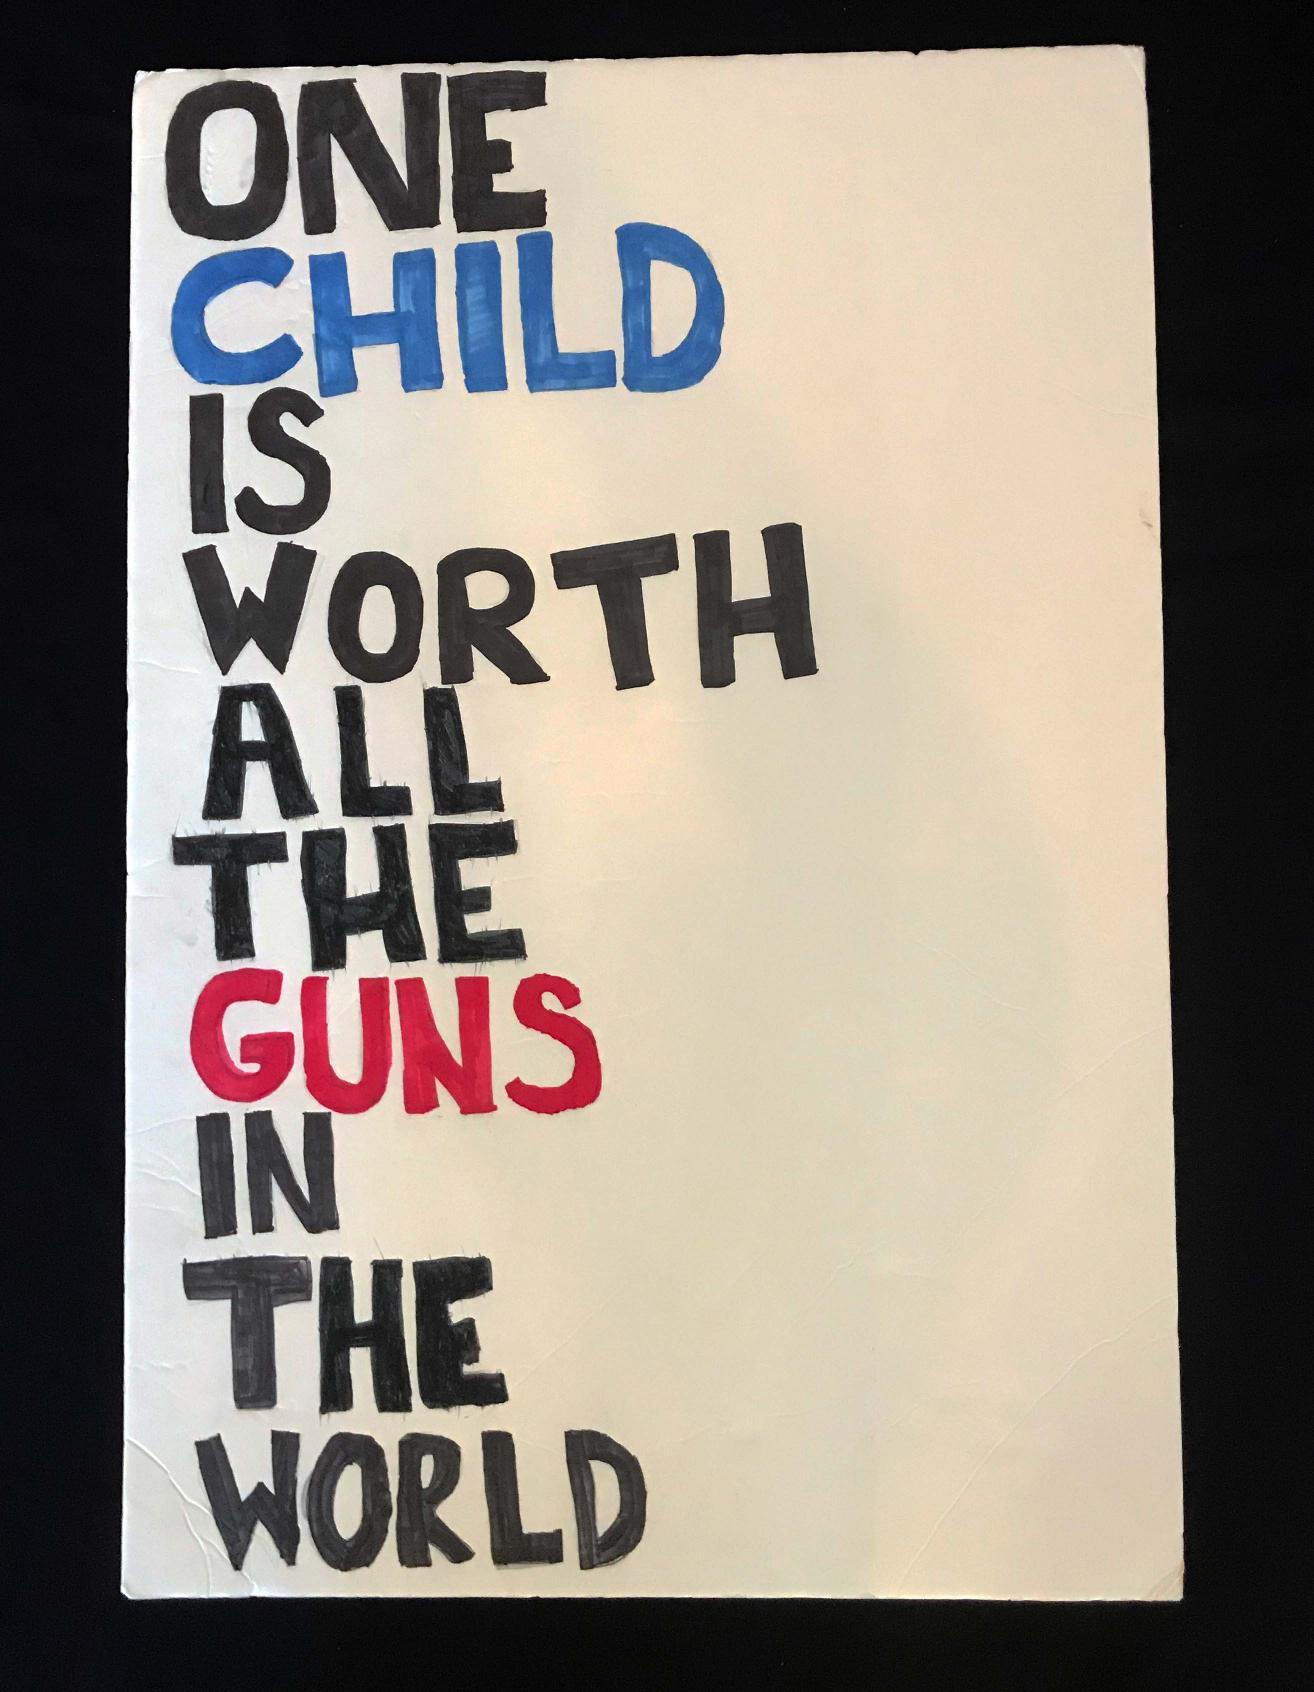 Charlotte March for Our Lives, 2018. Sign reads: "One child is worth all the guns in the world."